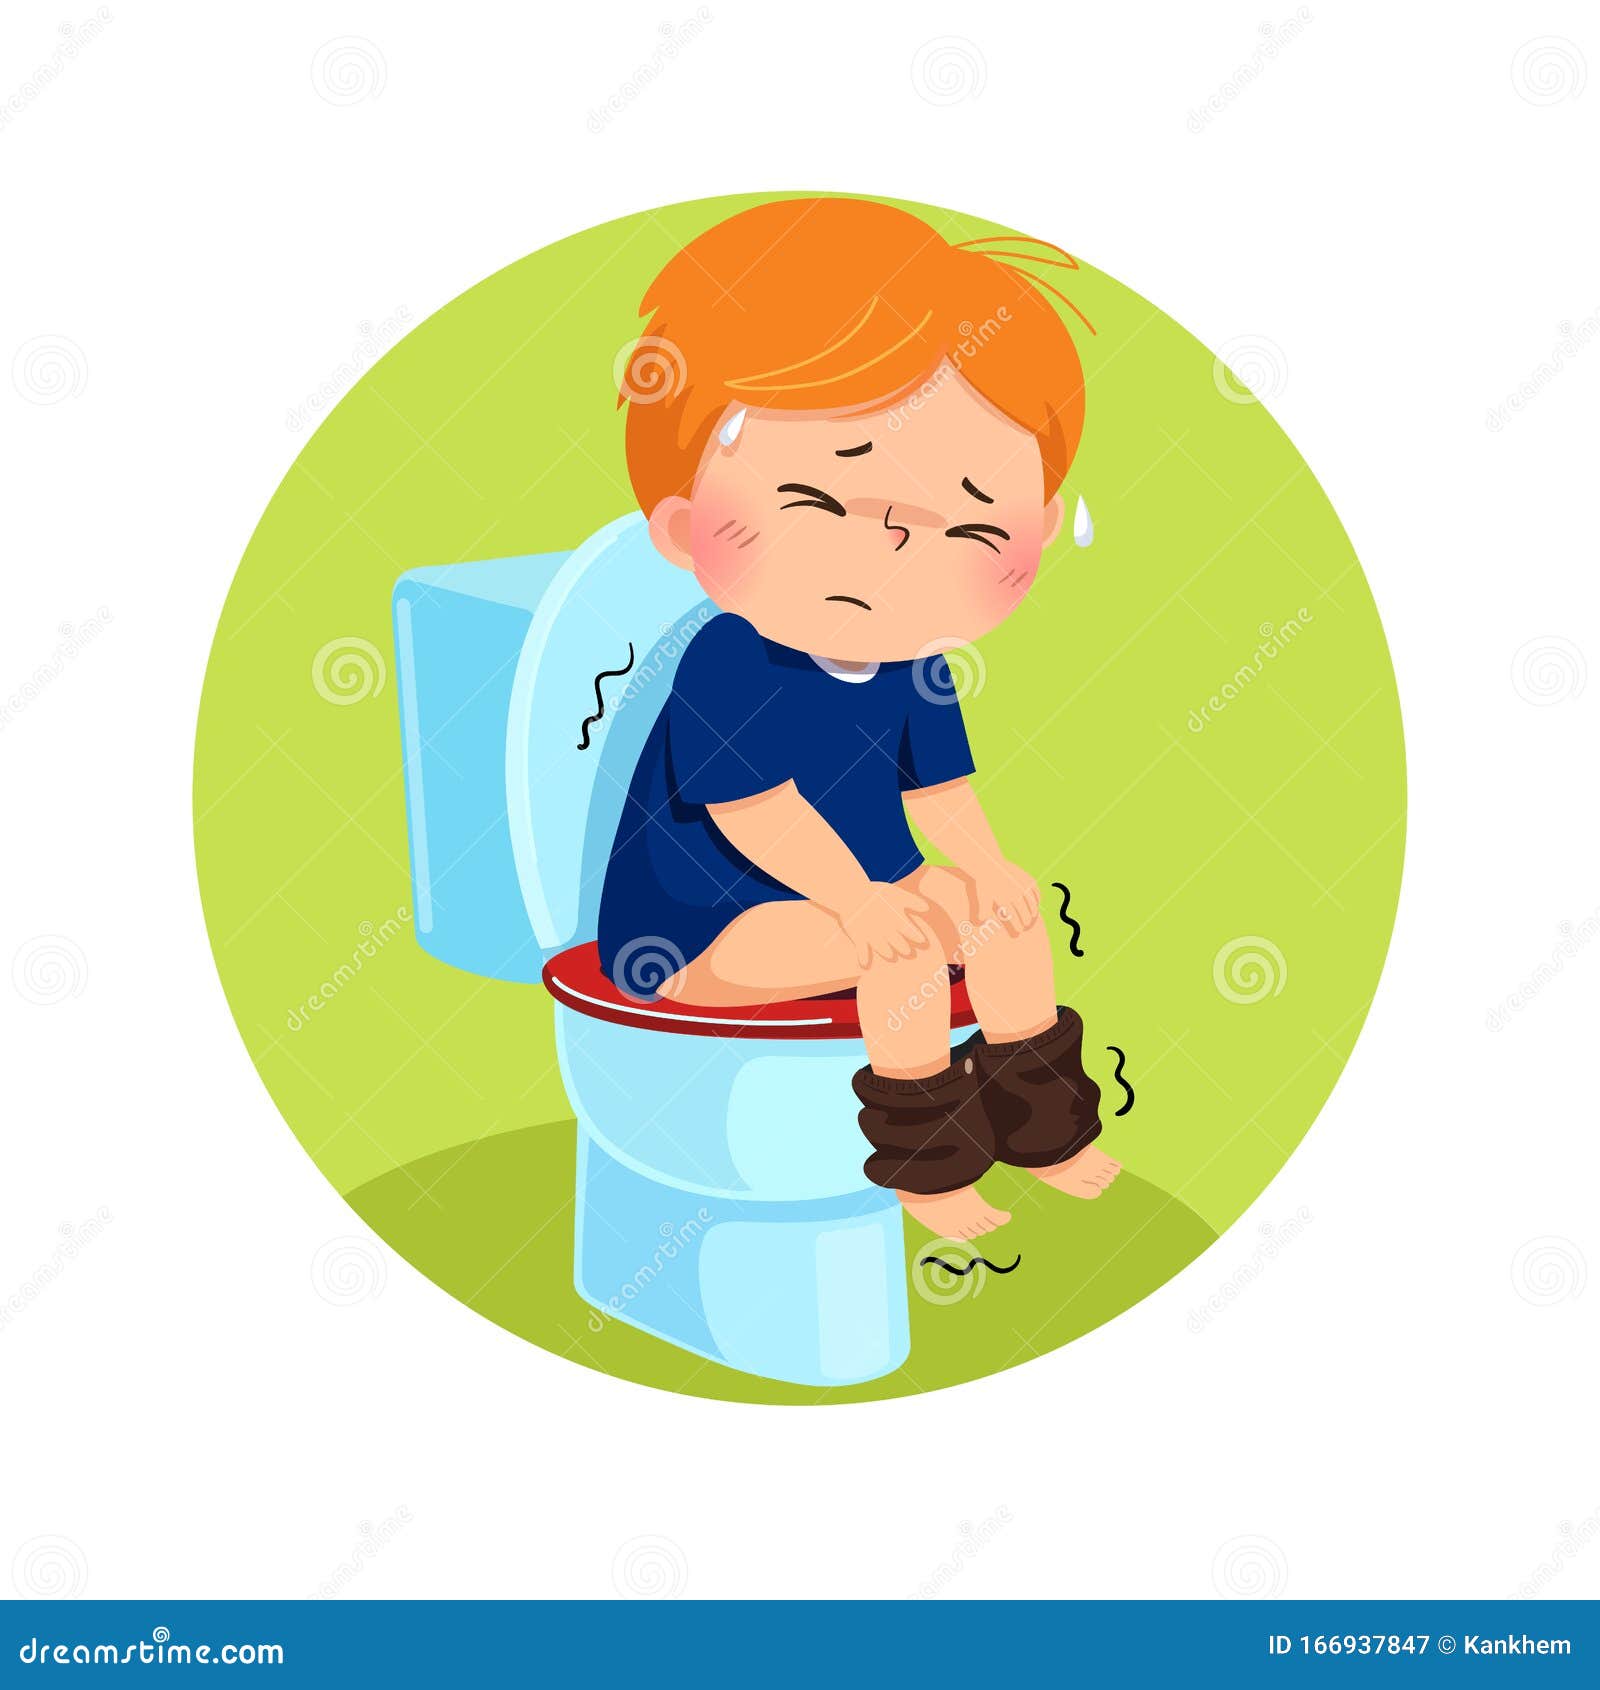 Cartoon Boy Sitting on the Toilet and Suffering from Diarrhea or  Constipation. Health Problems Concept Stock Vector - Illustration of hurt,  abdominal: 166937847